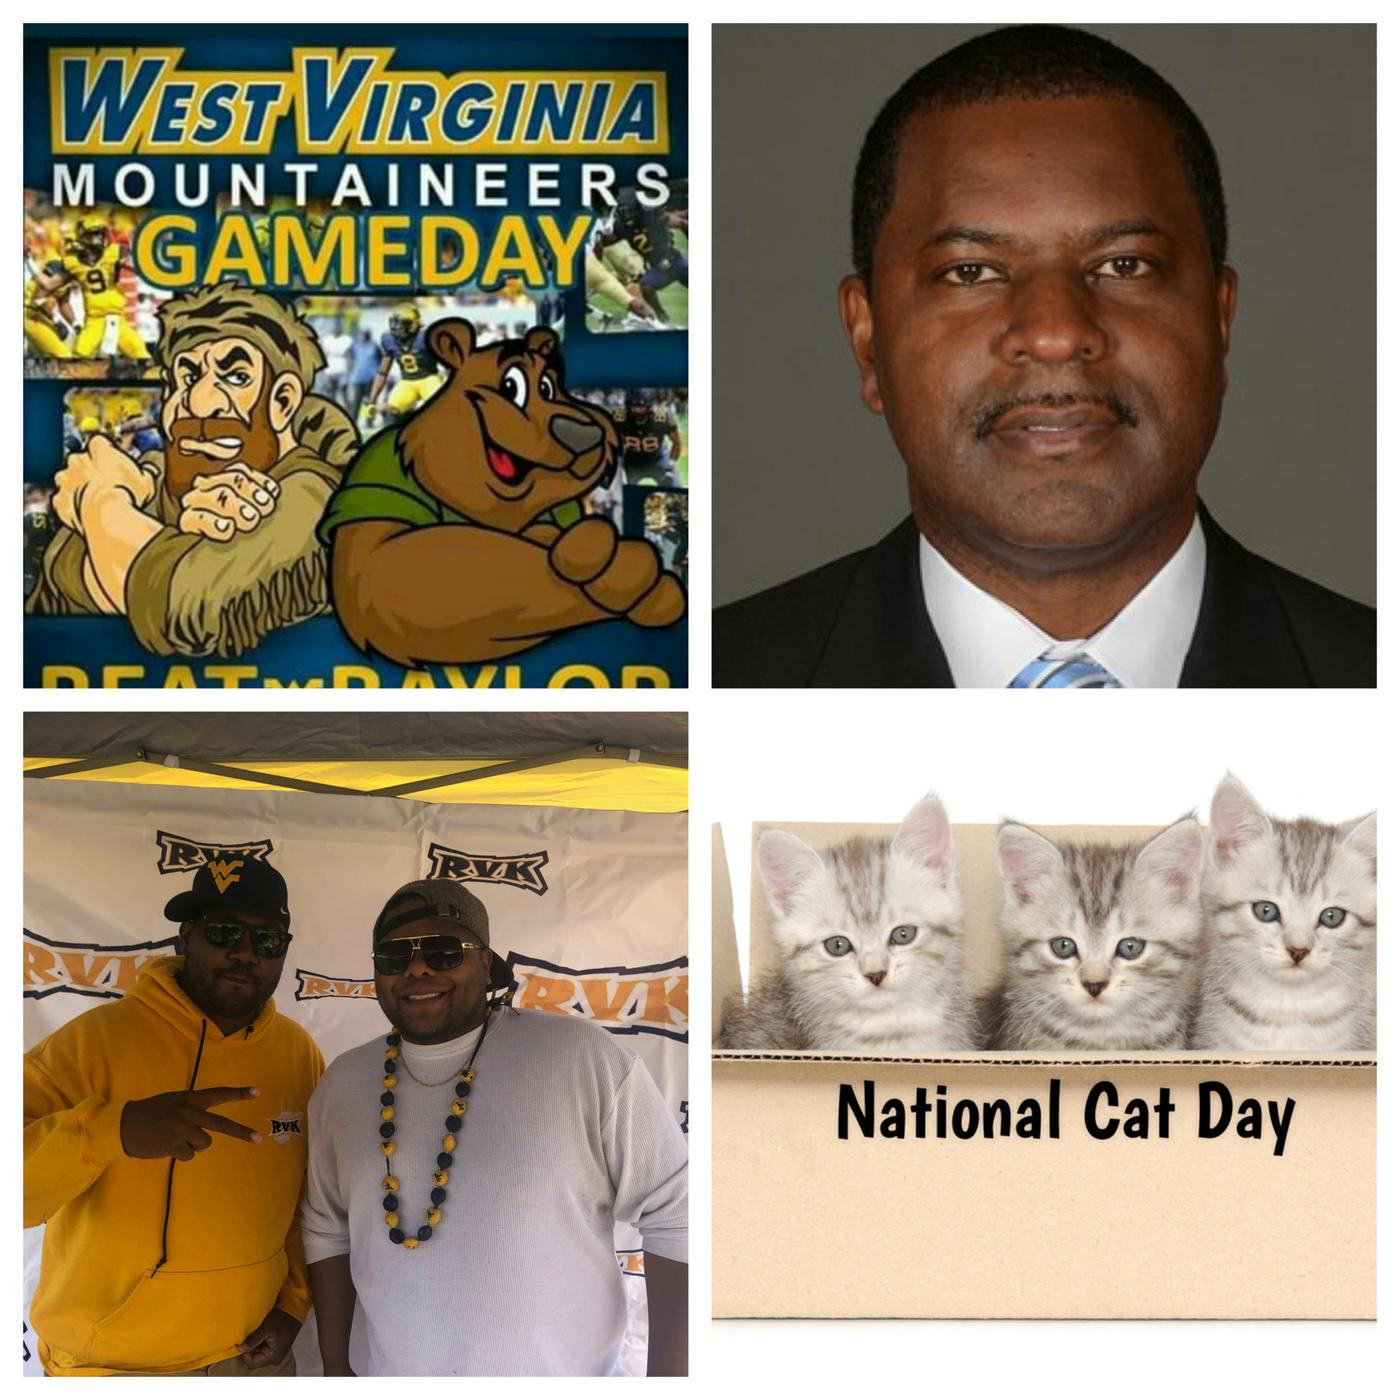 Ep. 135 - Game Day, National Cat Day, Why We Hate BU, & Coach Harrison Interview